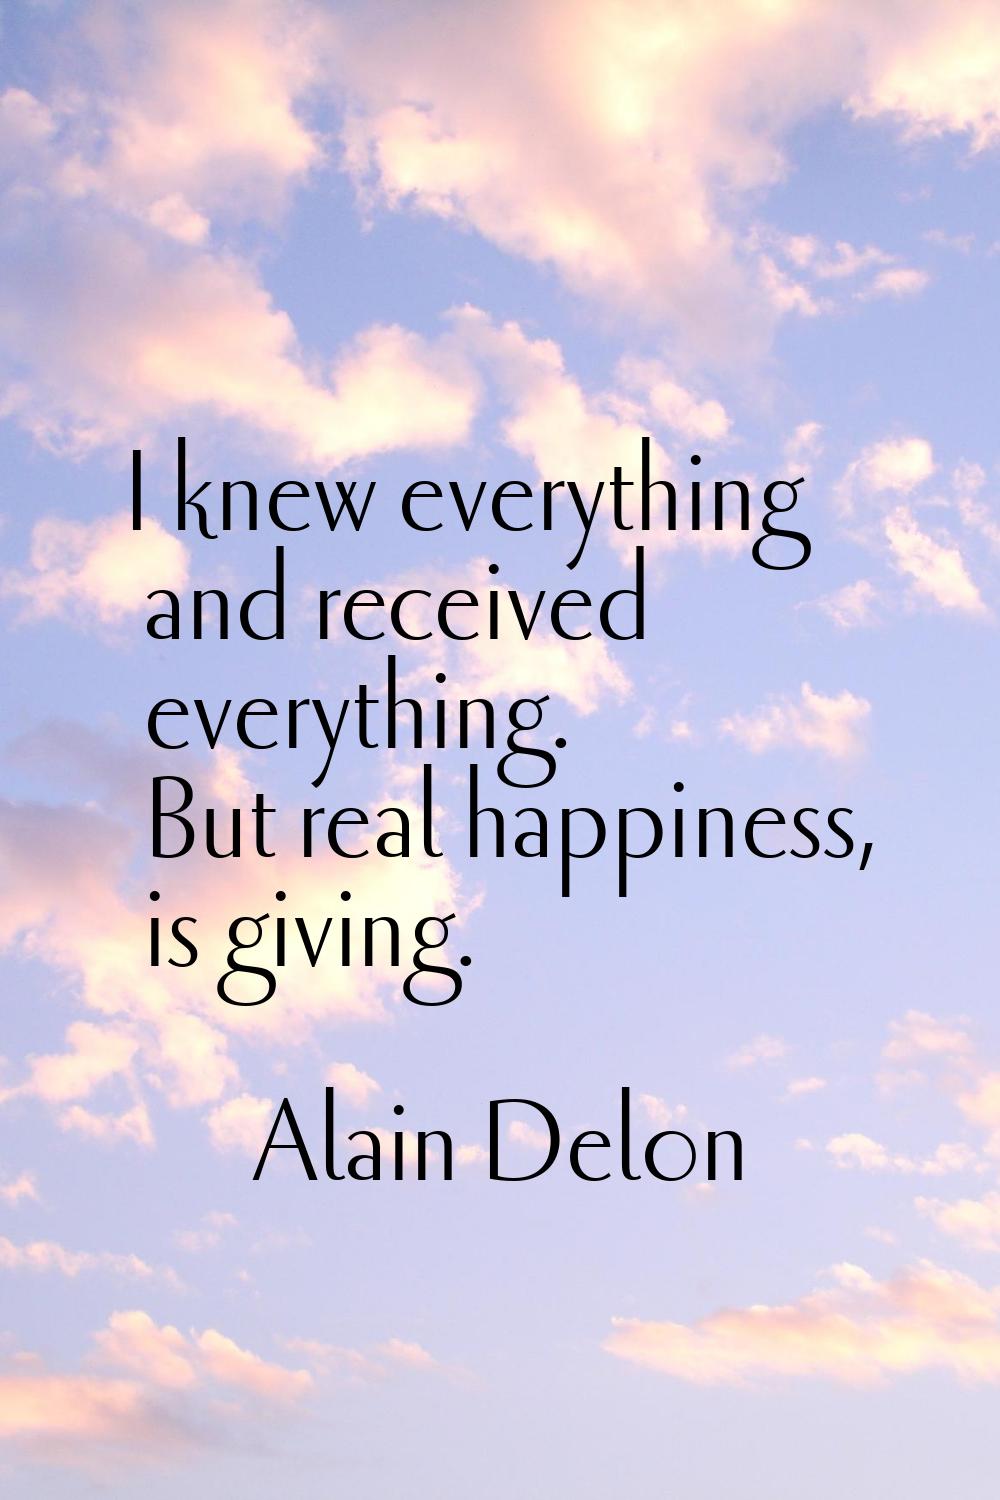 I knew everything and received everything. But real happiness, is giving.